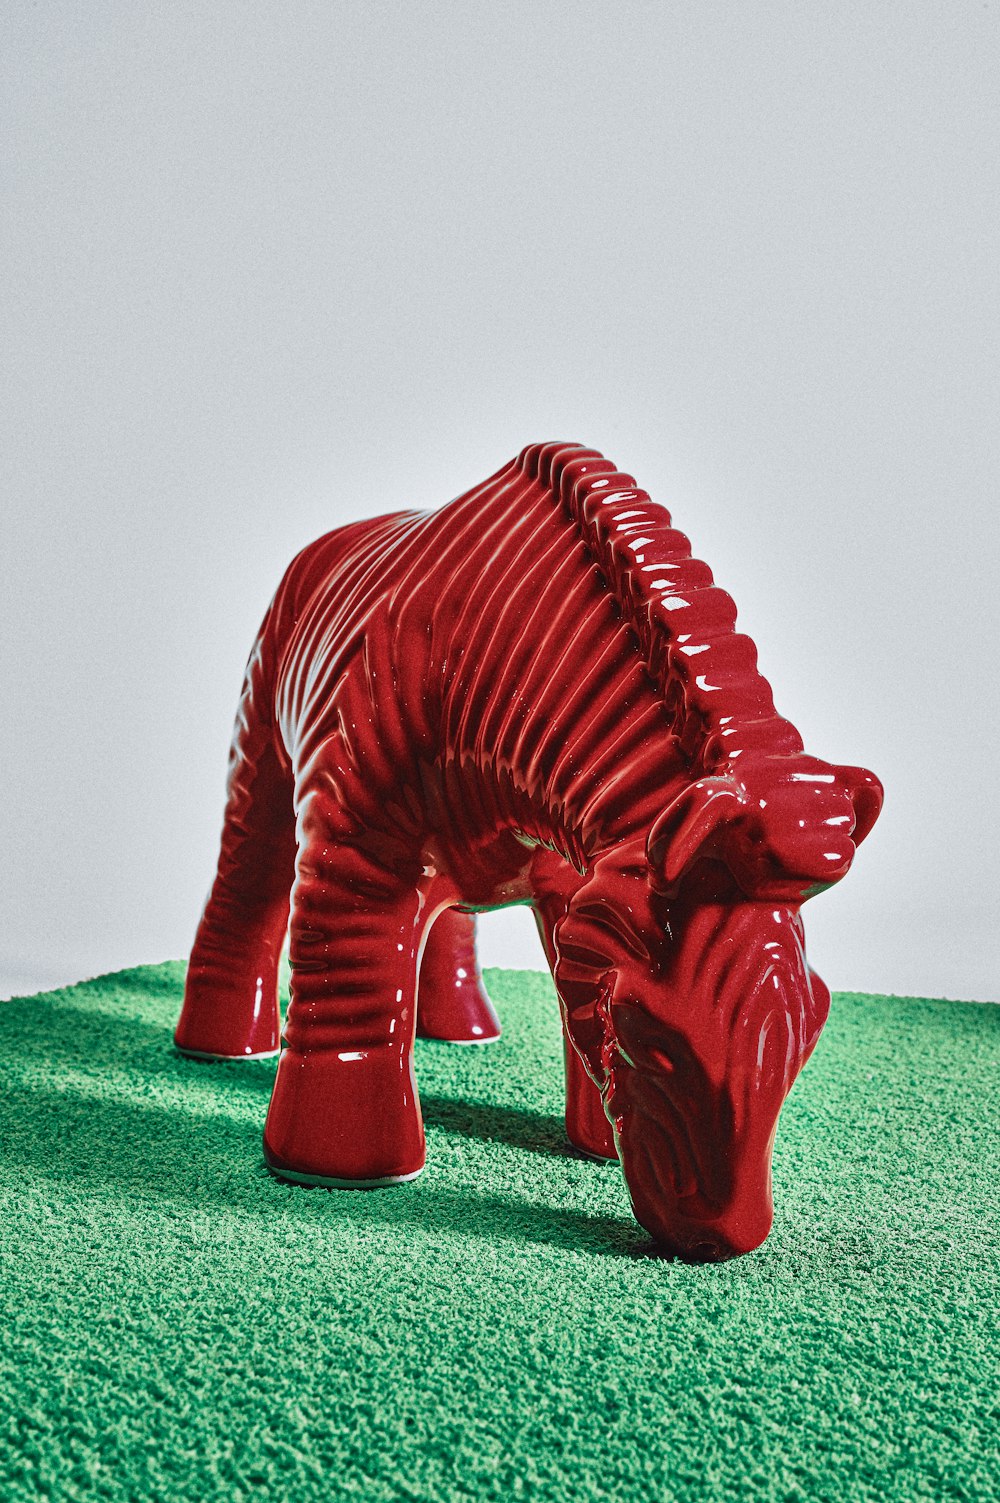 red elephant figurine on green textile